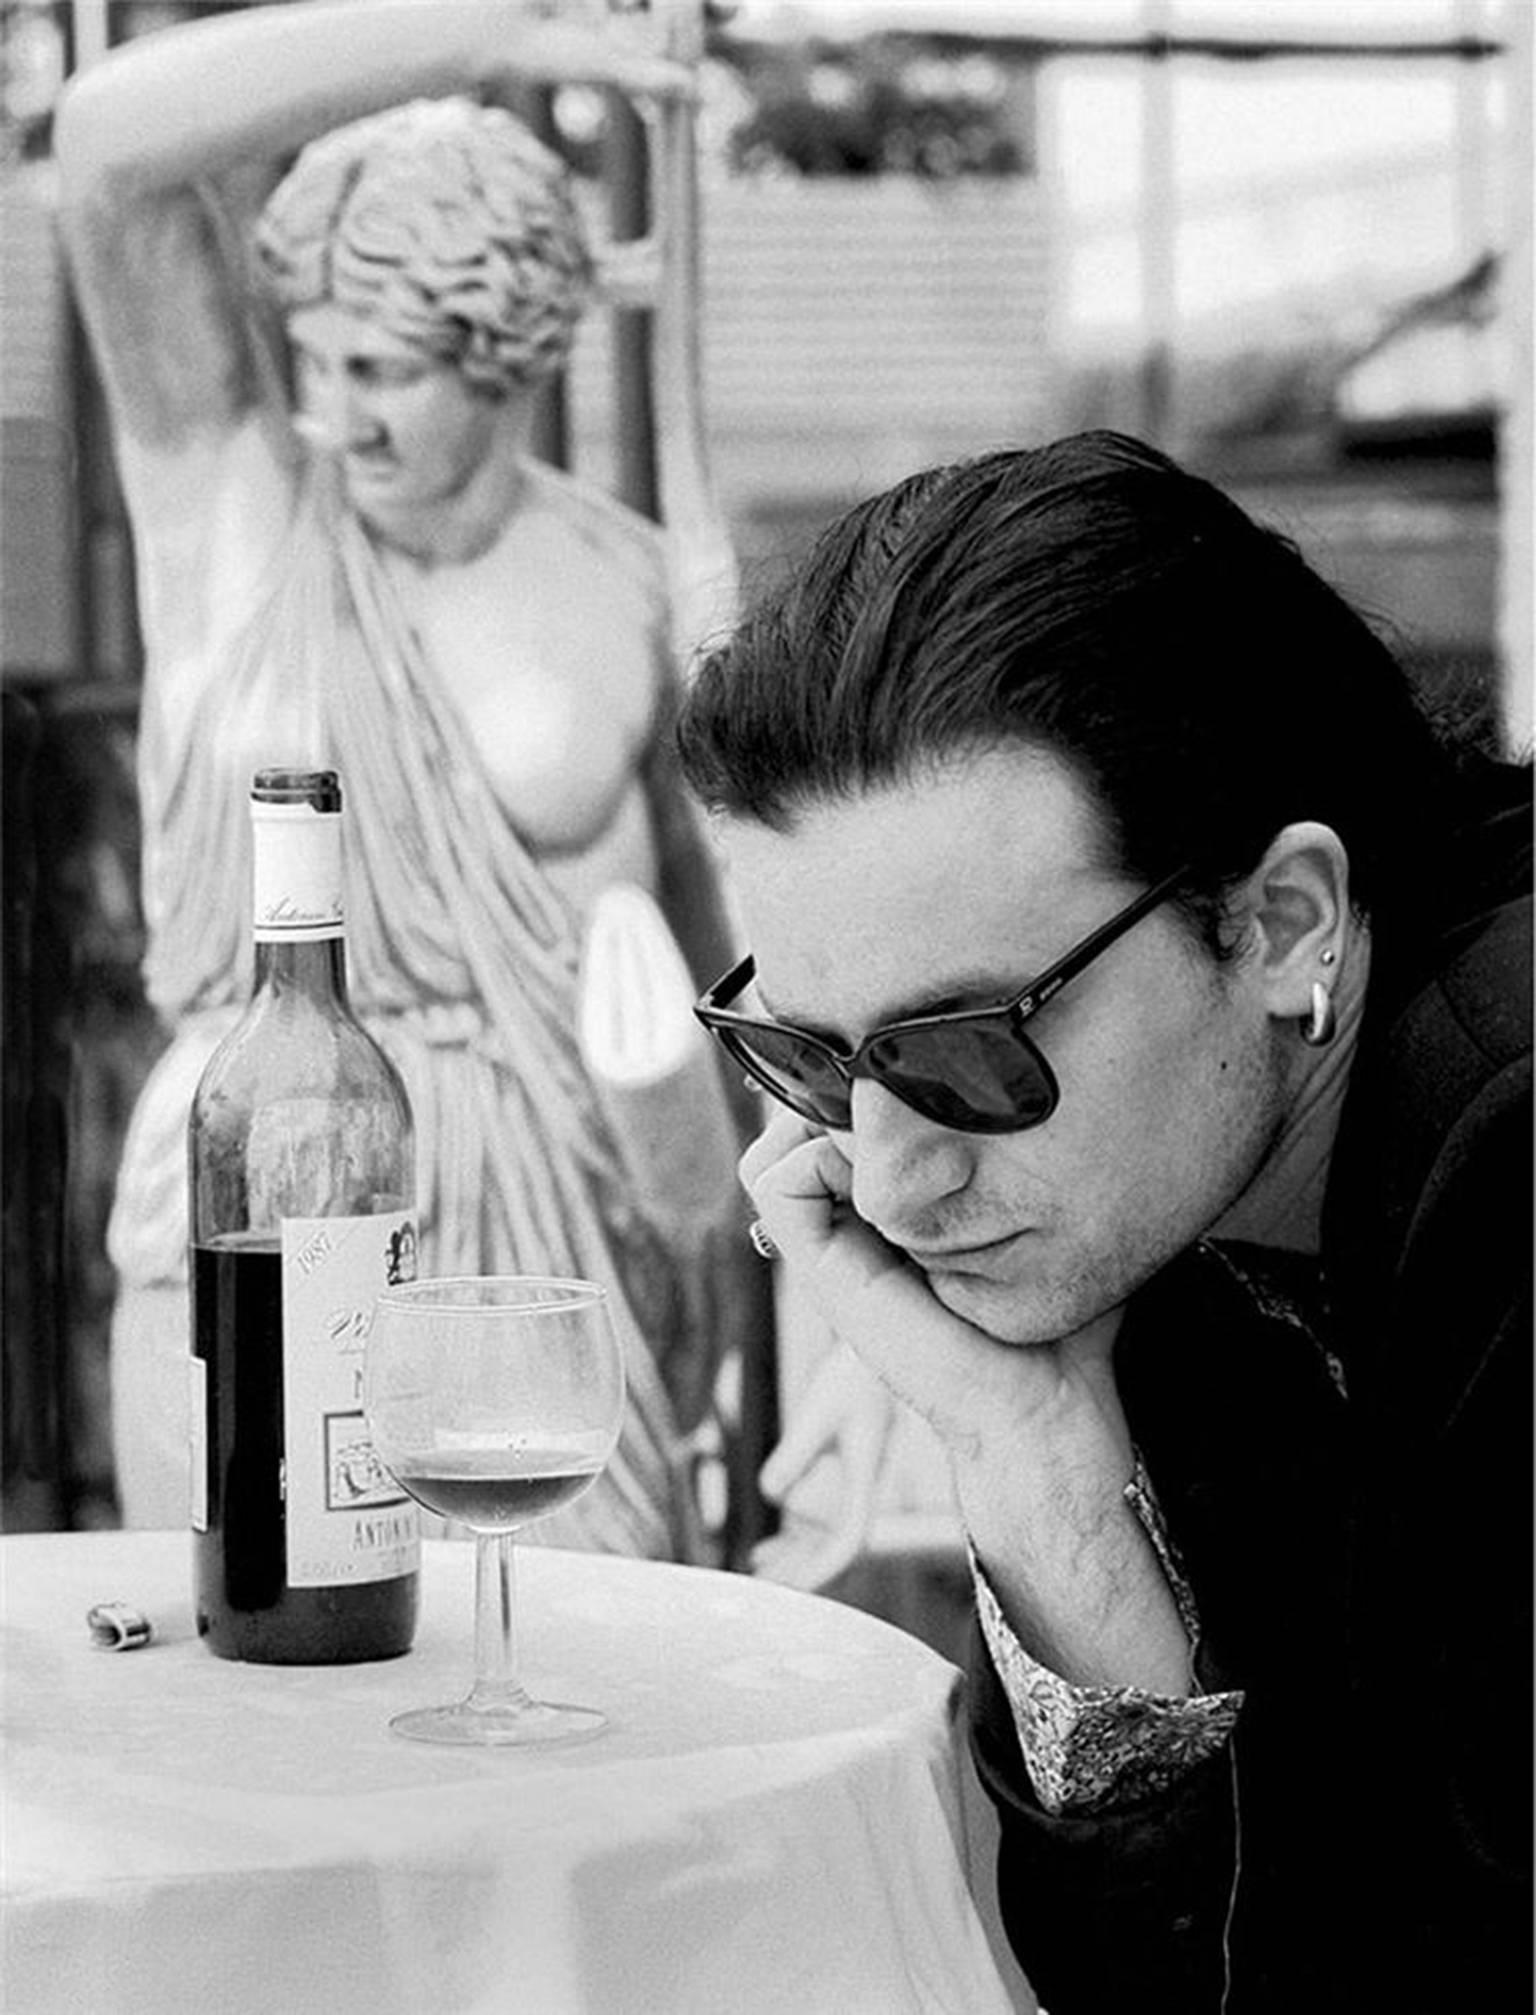 Colm Henry Black and White Photograph – Bono mit Weinglas in Rom, 1989